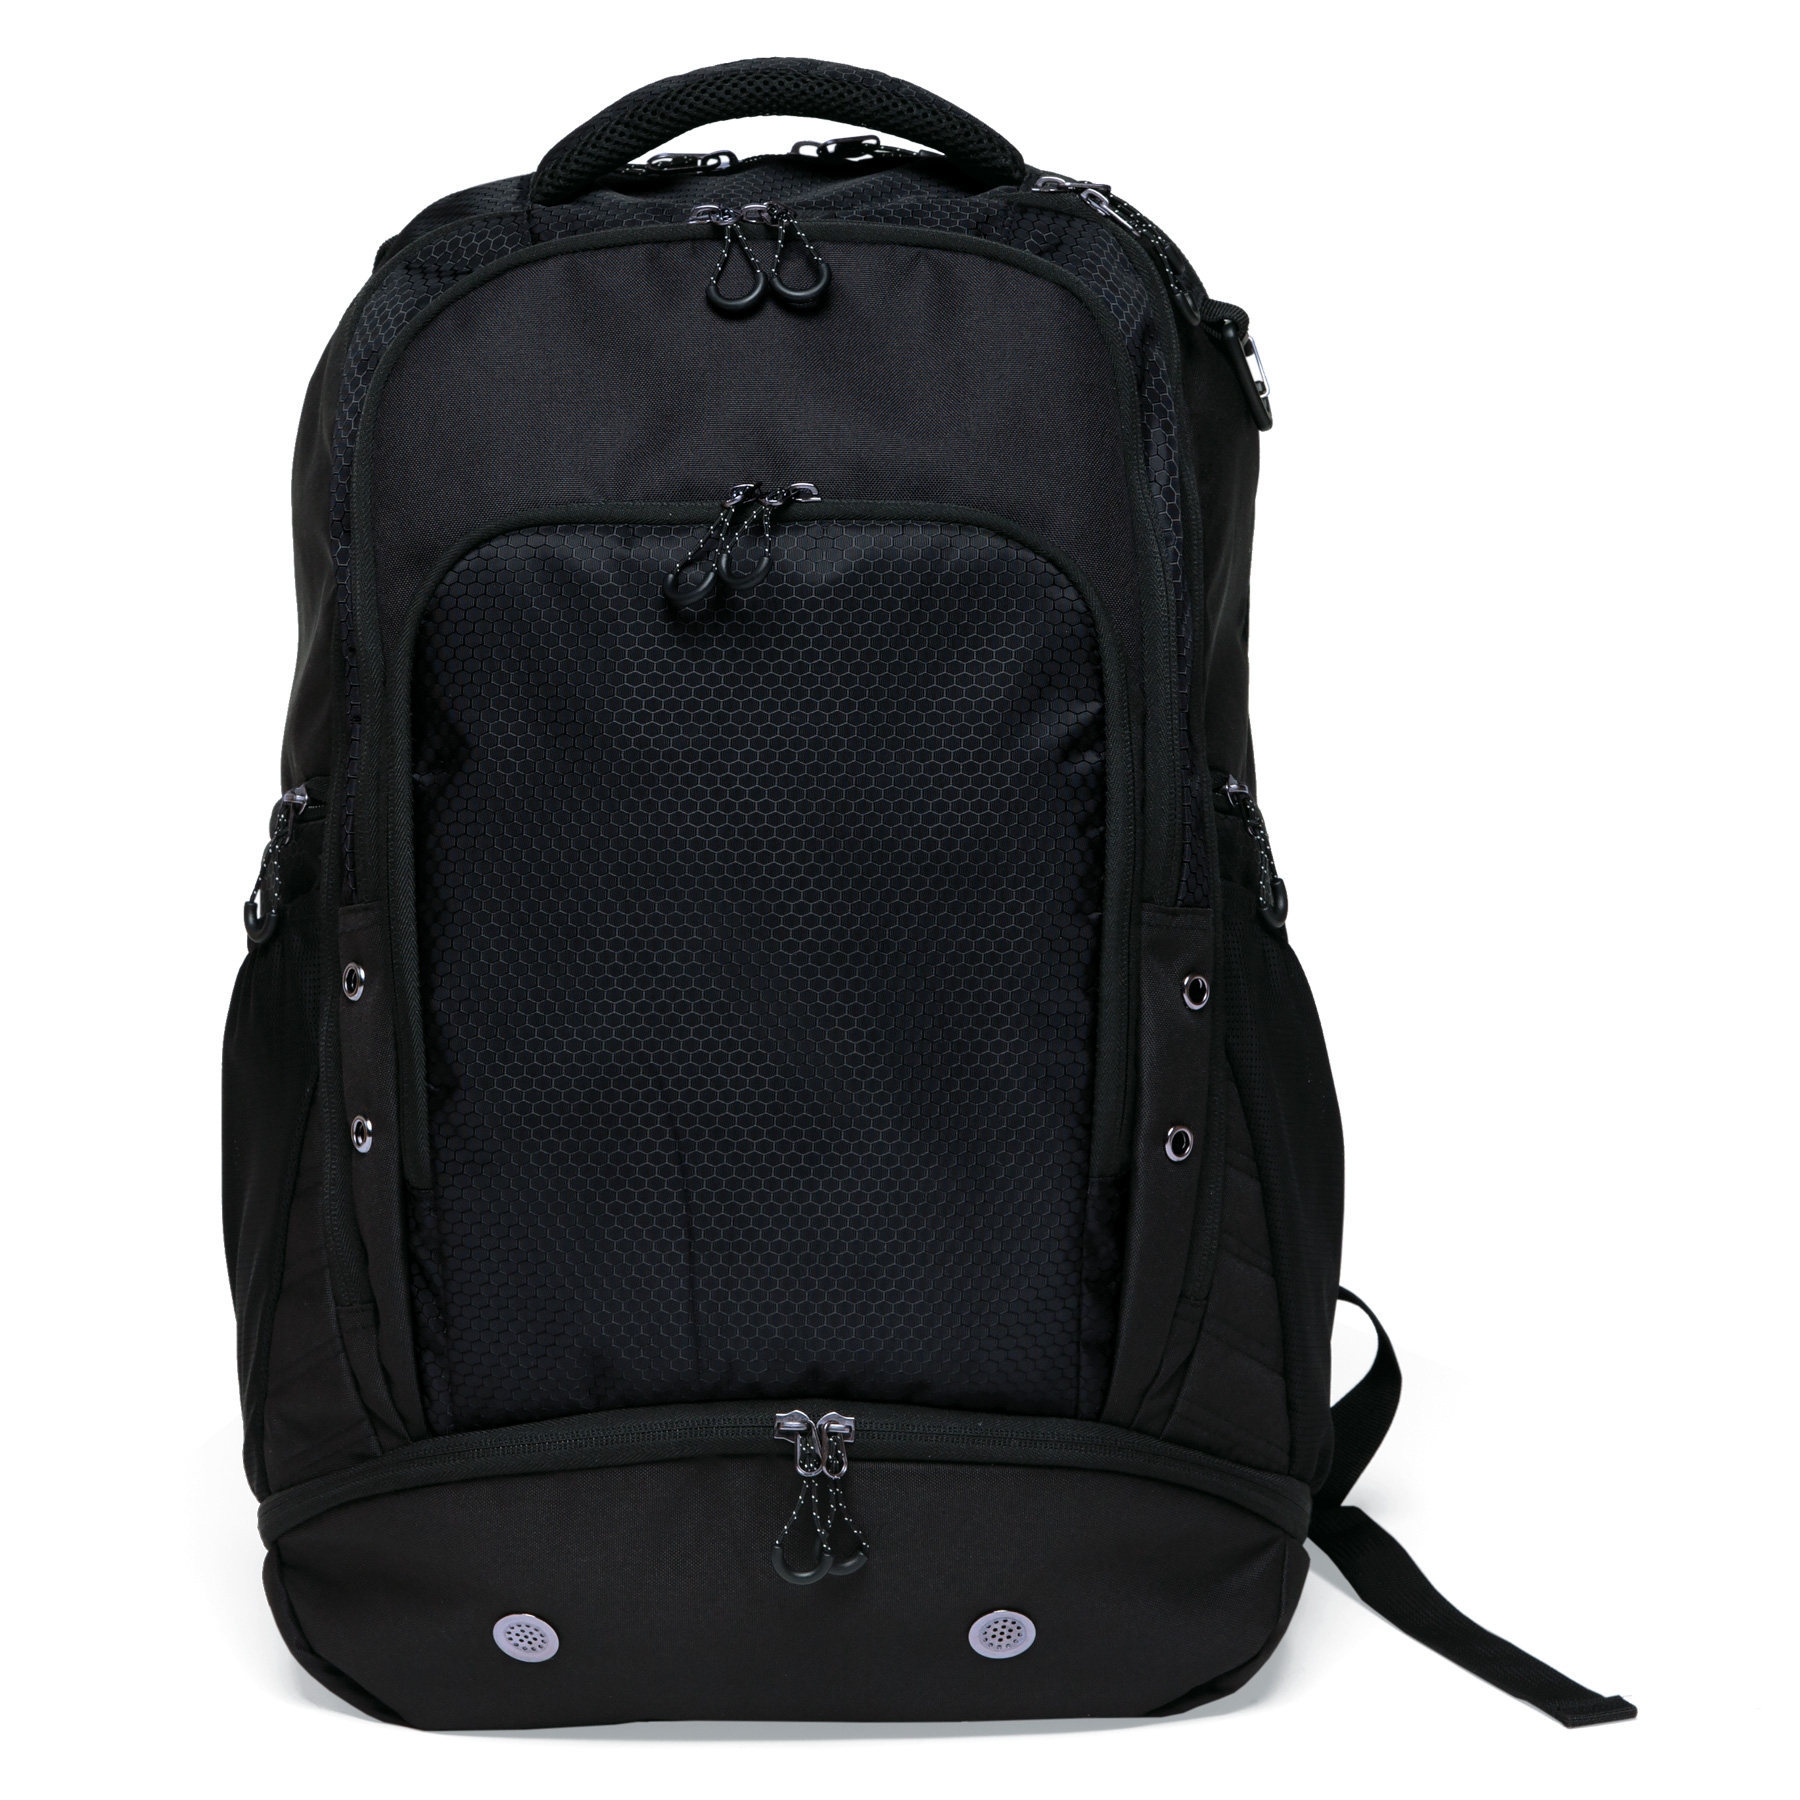 Grid-Lock Backpack | Gear For Life